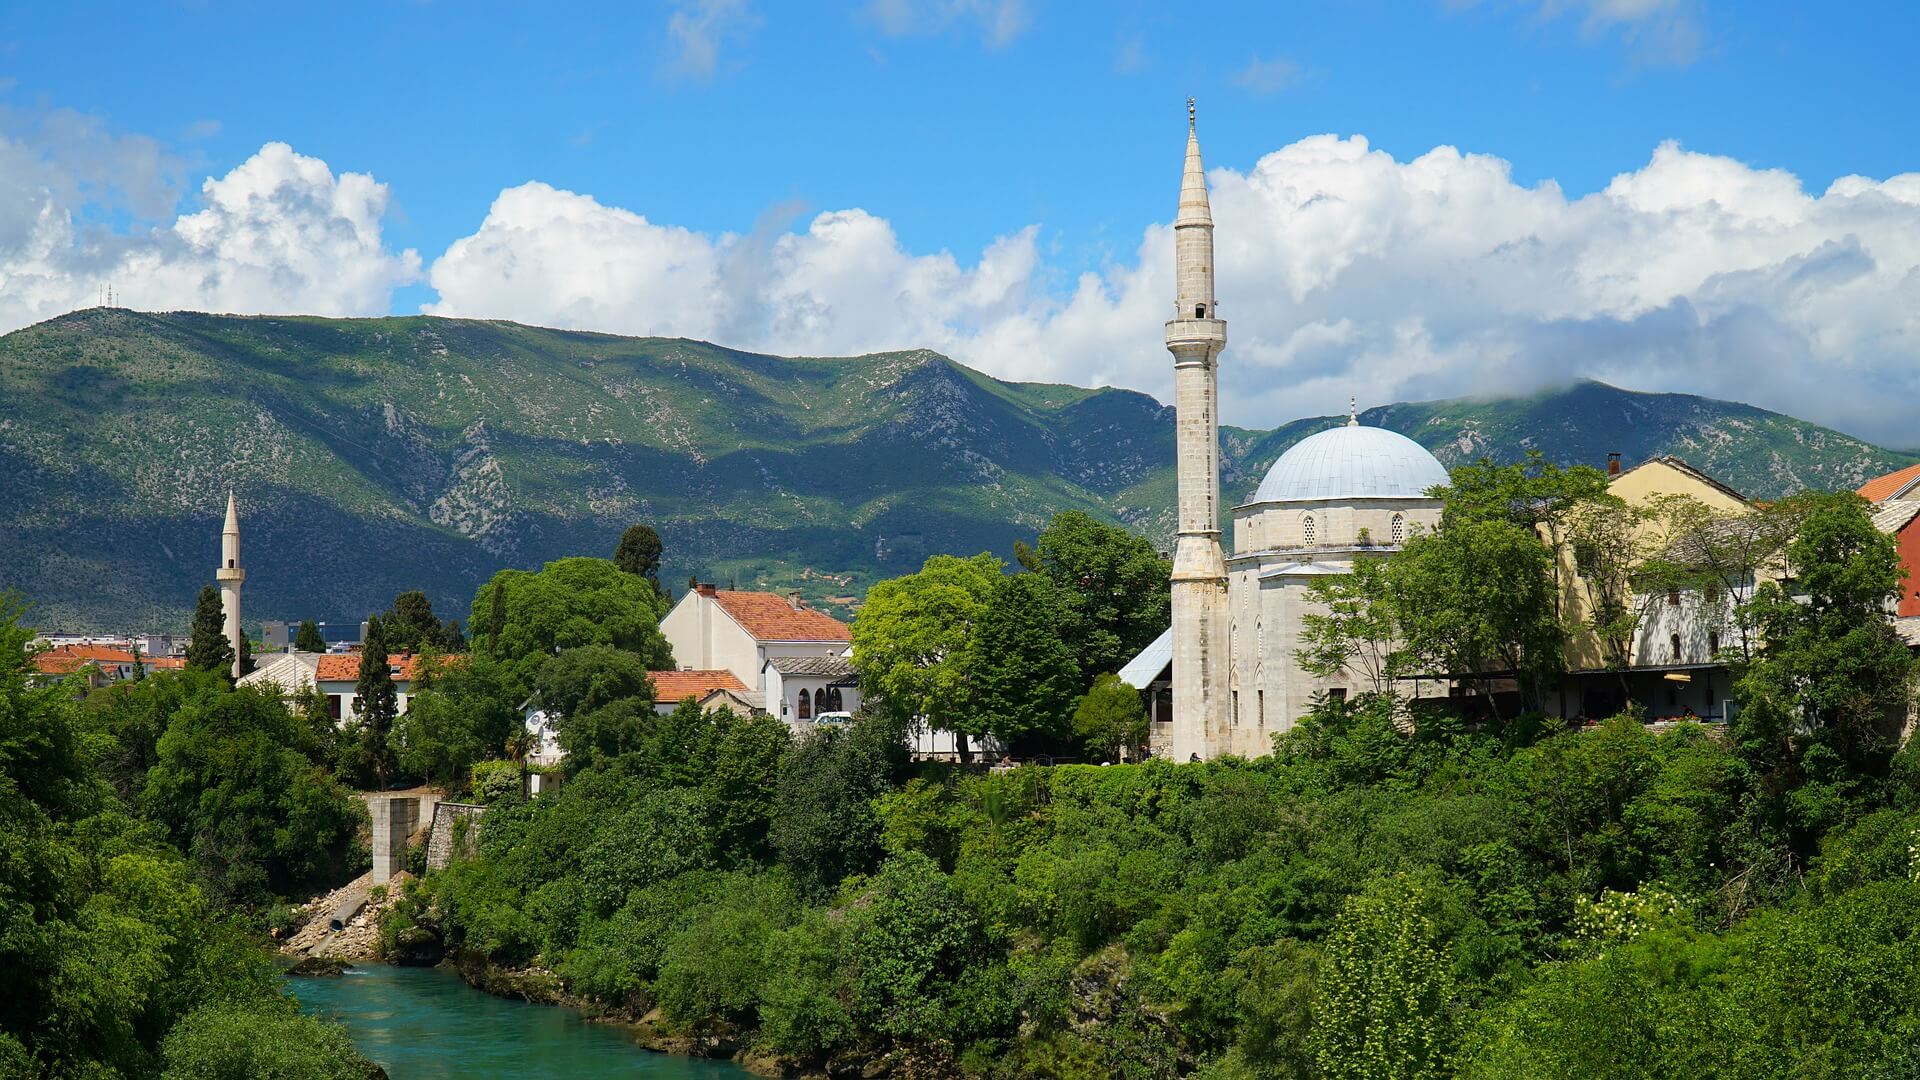 RamicLemstra-The city of Mostar in Bosnia and Herzegovina. Pixabay